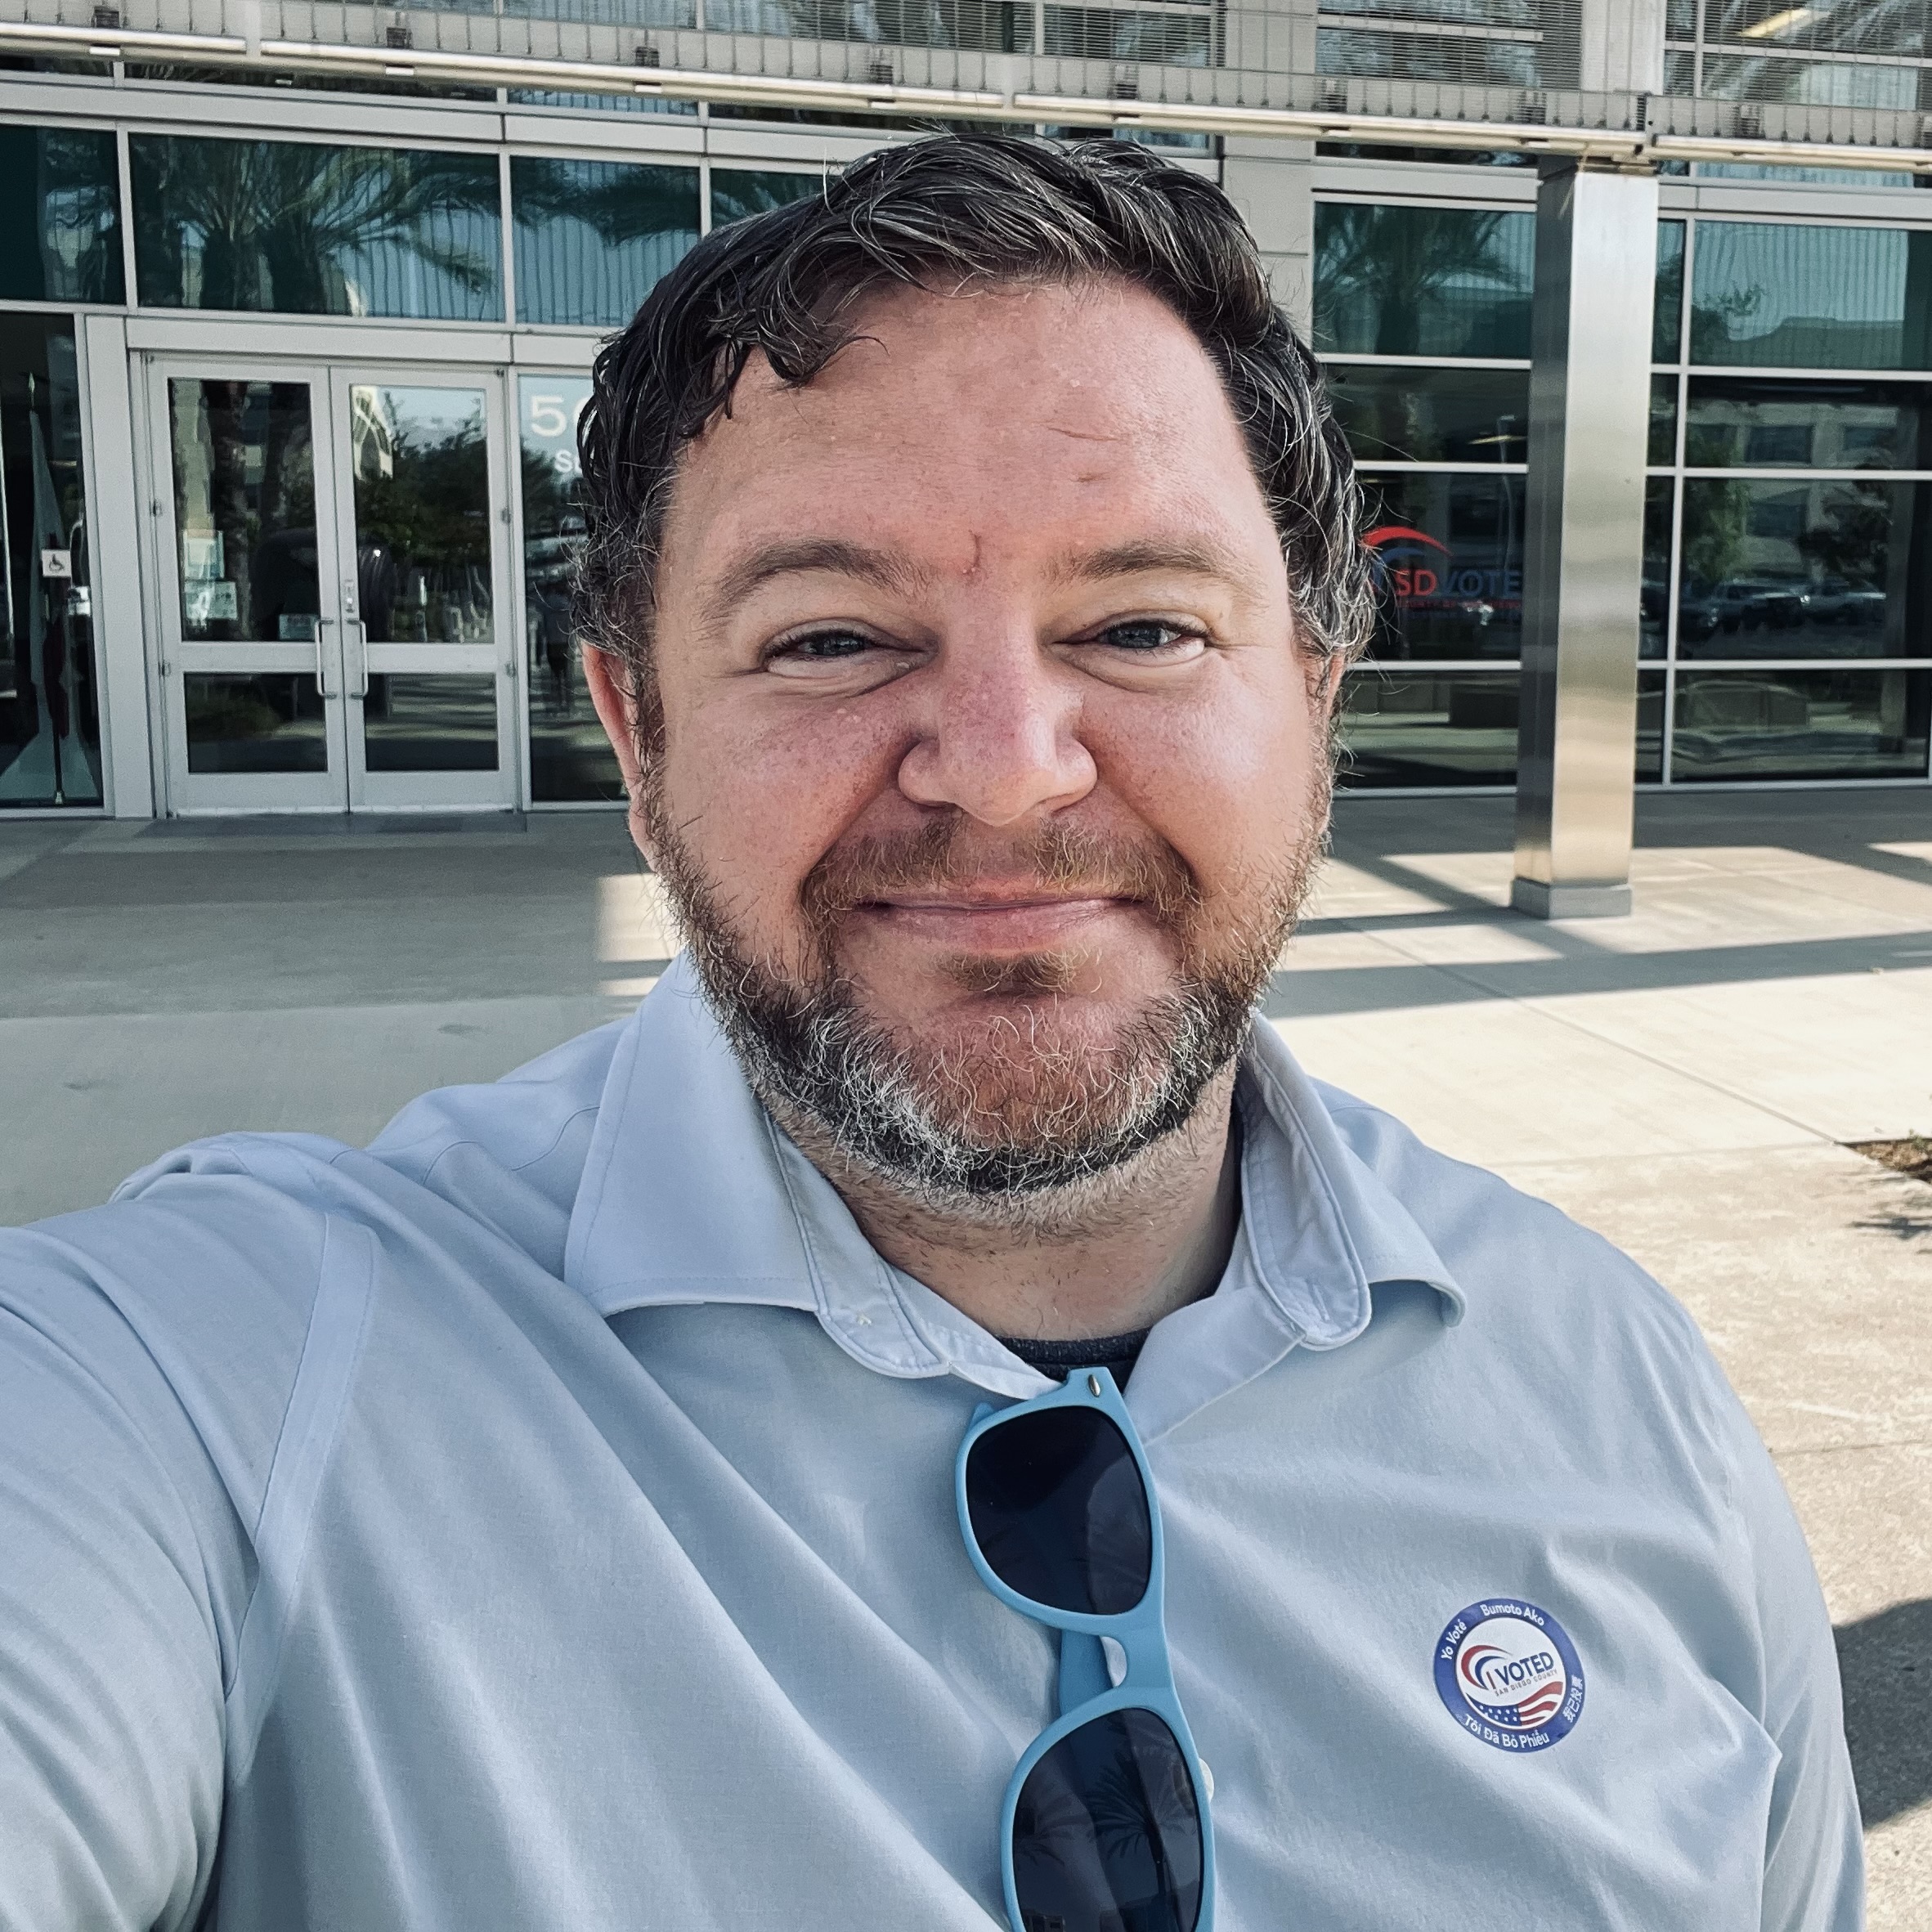 Picture of Ryan Trabuco smiling in a casual collared shirt in front of the county voter registrar building